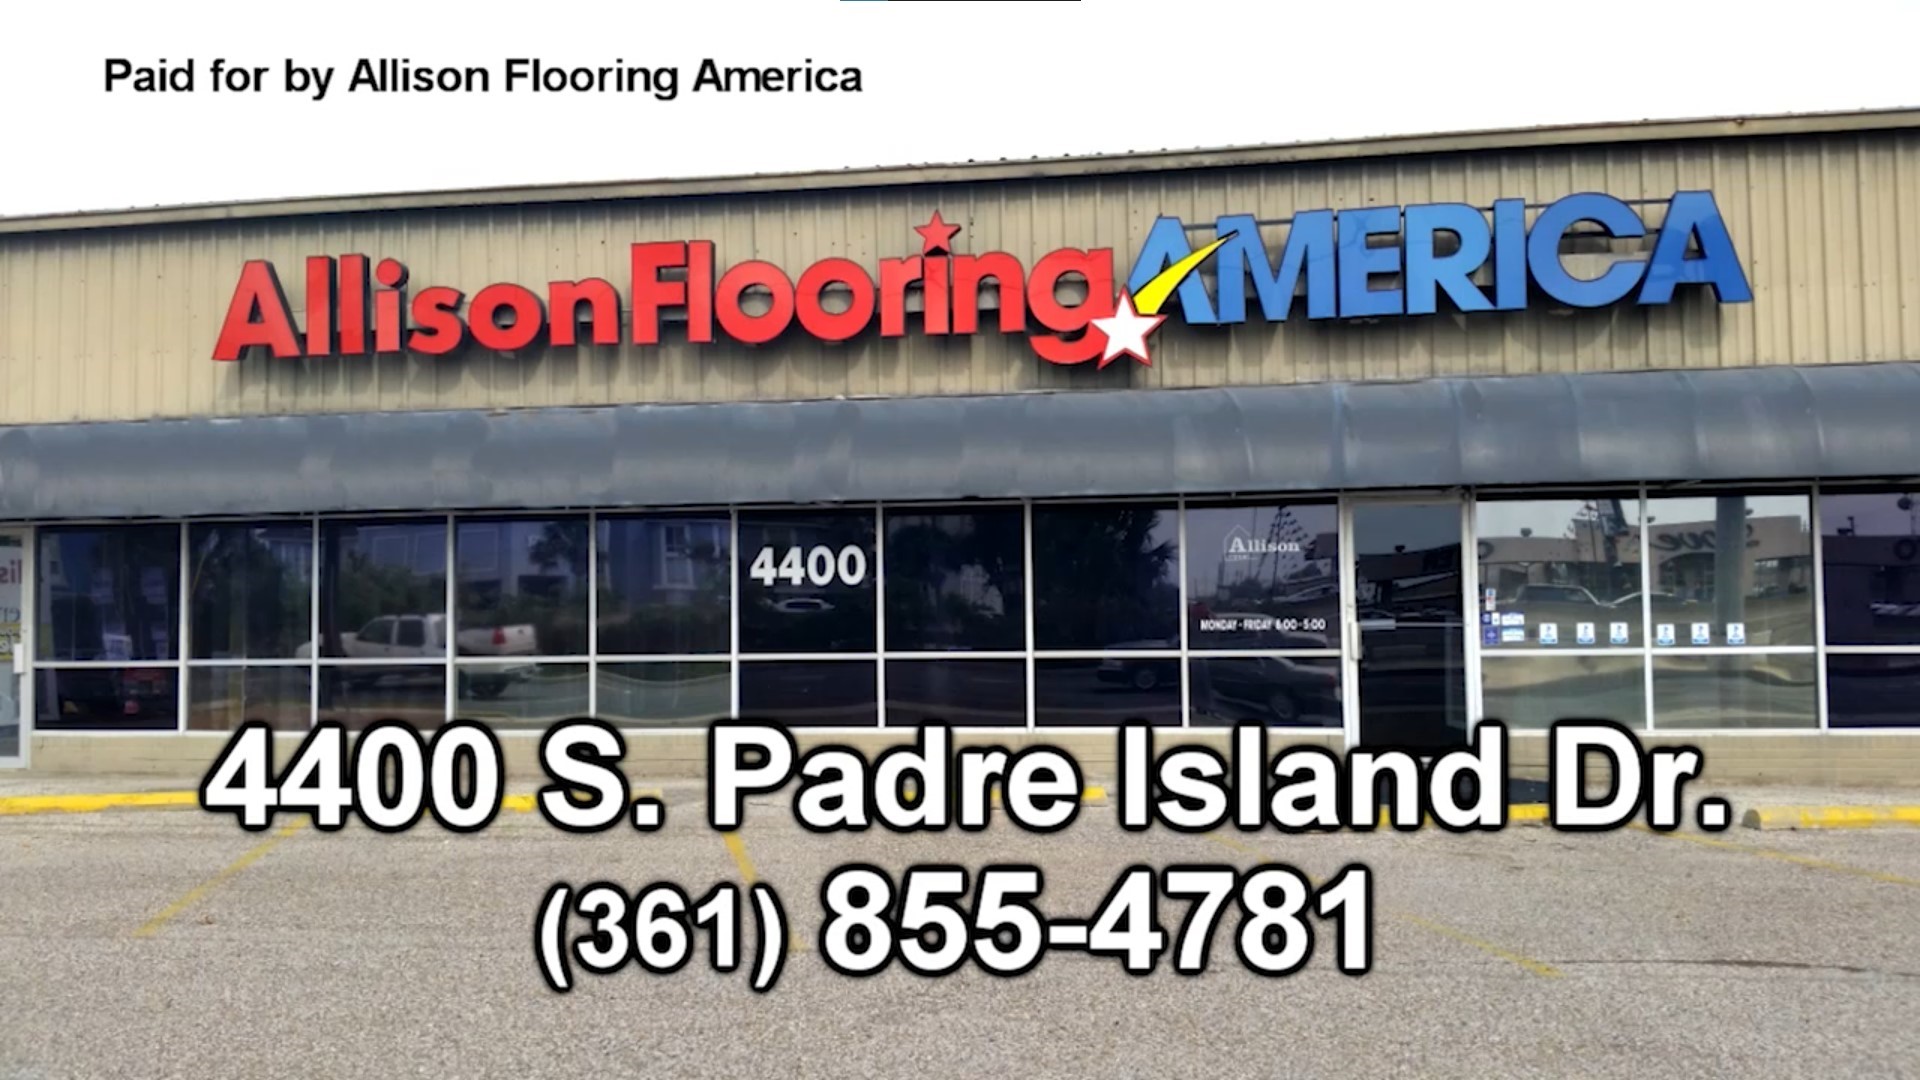 Around the Bend is a weekly sponsored segment featuring businesses in the Coastal Bend. In this segment, Allison Flooring discusses Warranty.